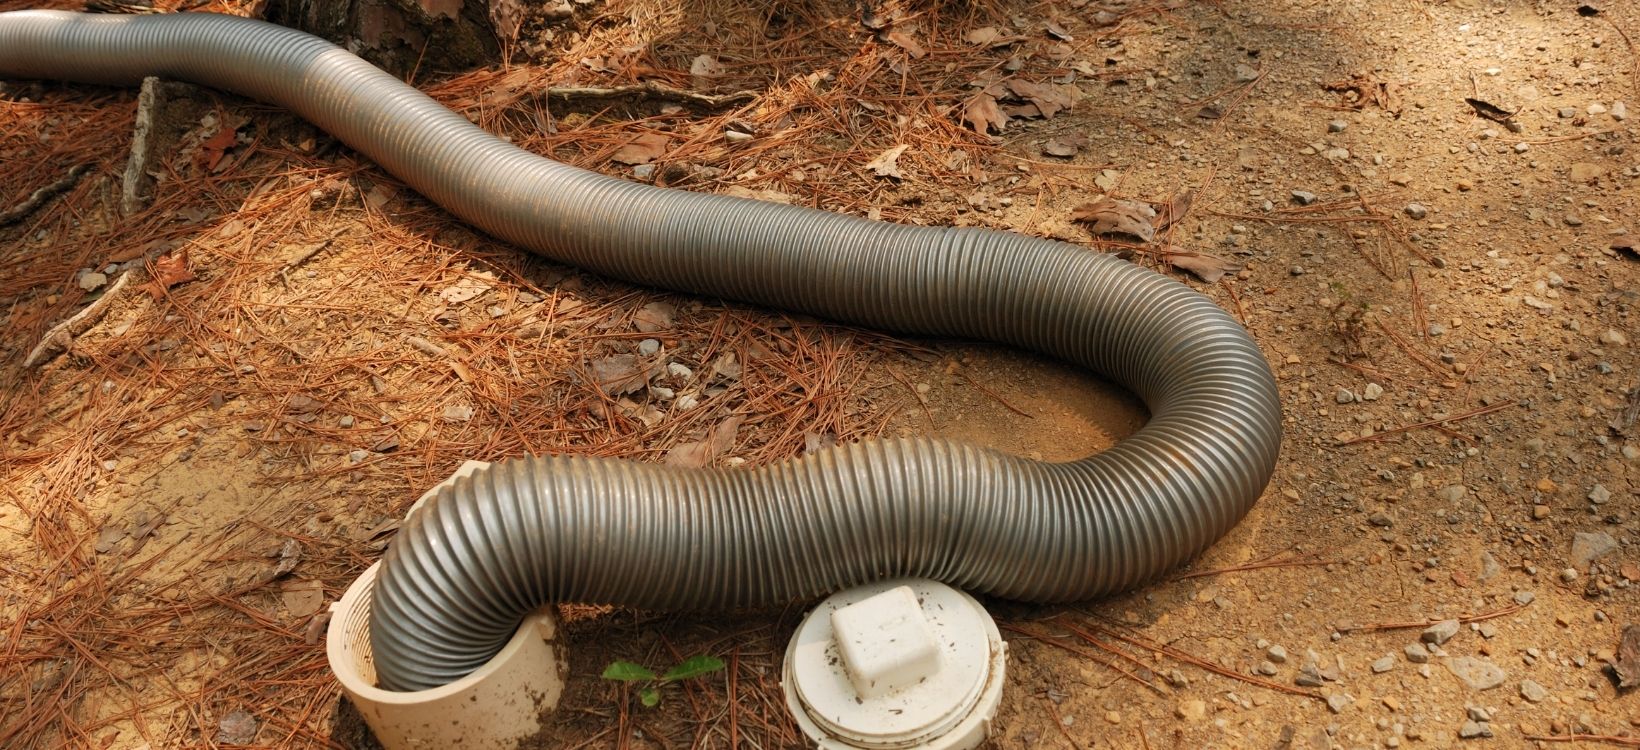 Stinky slinky is RV lingo for the hose used to dump your black tank.